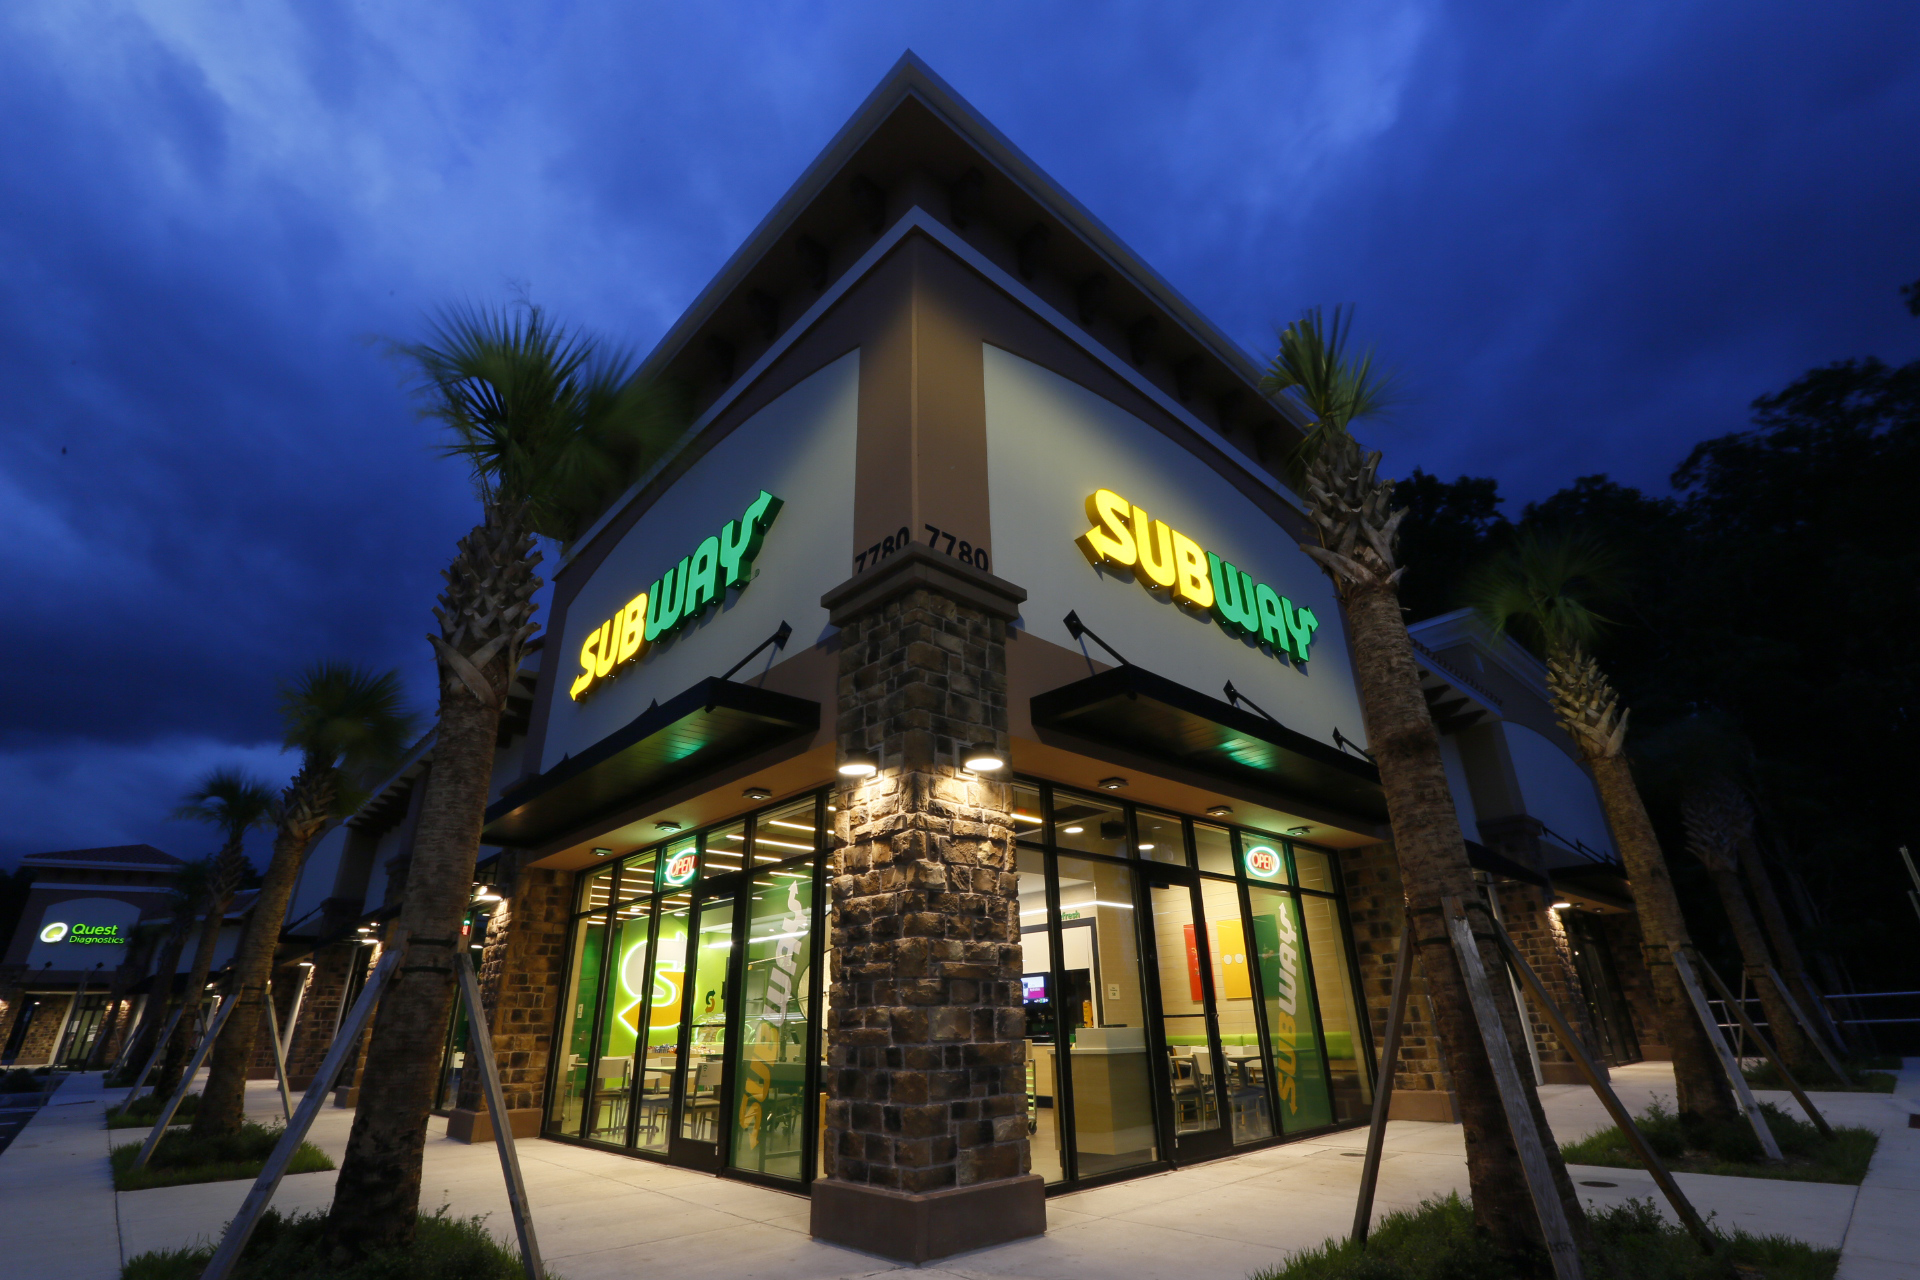 The new restaurant design is the next phase of Subway’s evolution.